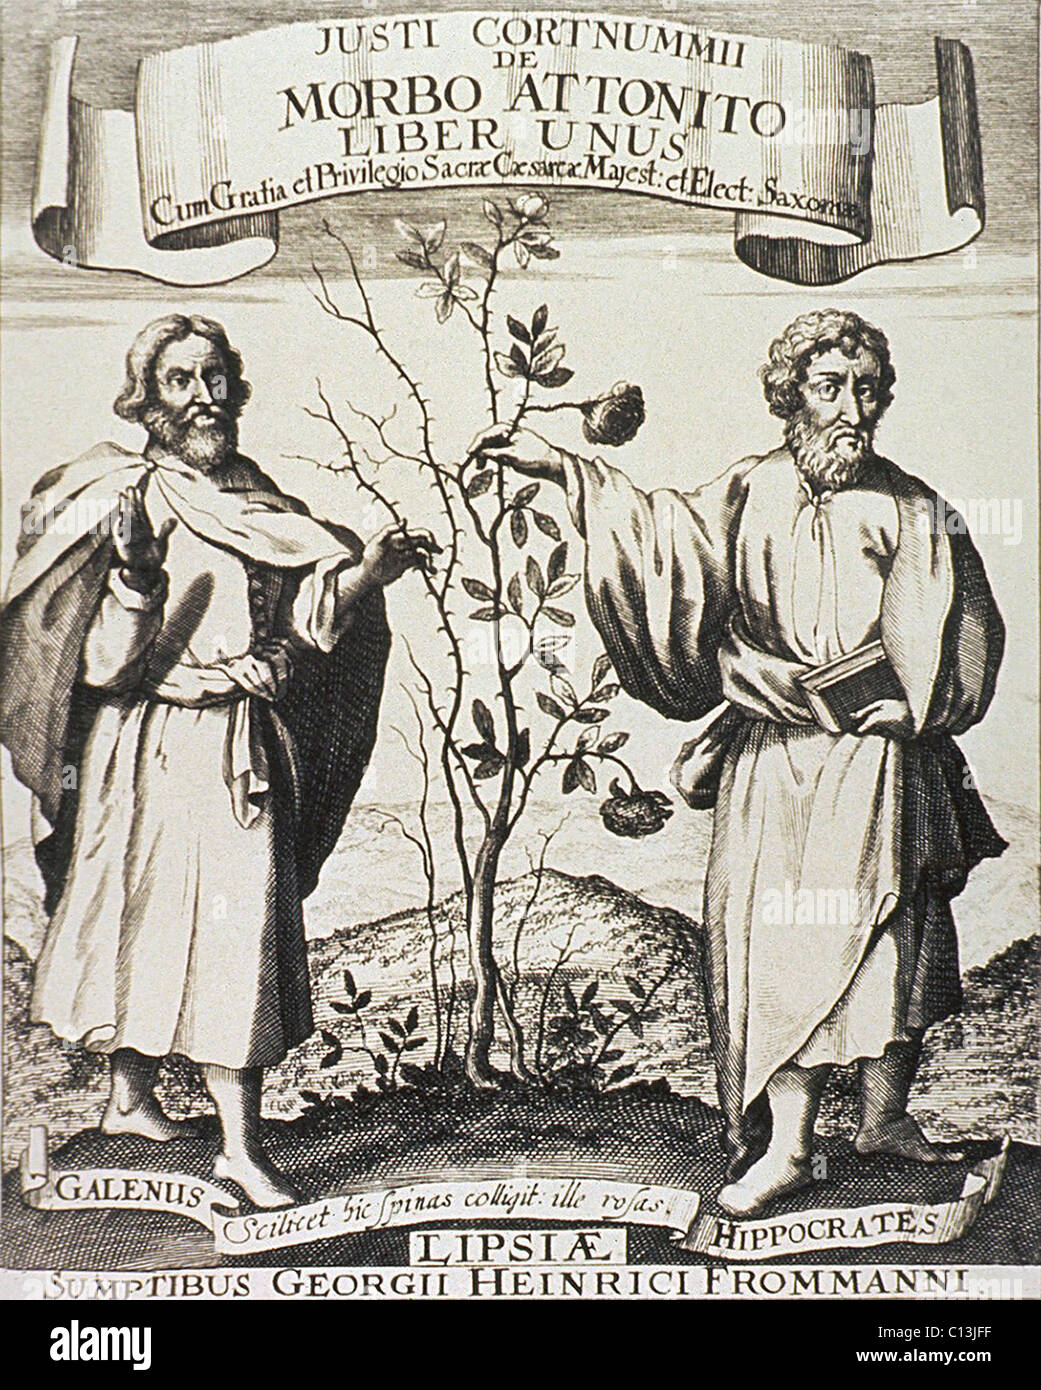 Hippocrates (on right) and Galen. Where Hippocrates touches the rosebush it flowers, whereas Galen's side is nothing but thorns. By the 17th century, the more empirically oriented Hippocrates was regarded as superior to the more theoretical Galen. Engraving from a 1677 German print in DE MORBO ATTONITO LIBER UNUS, by Justus Cortnumm. Stock Photo